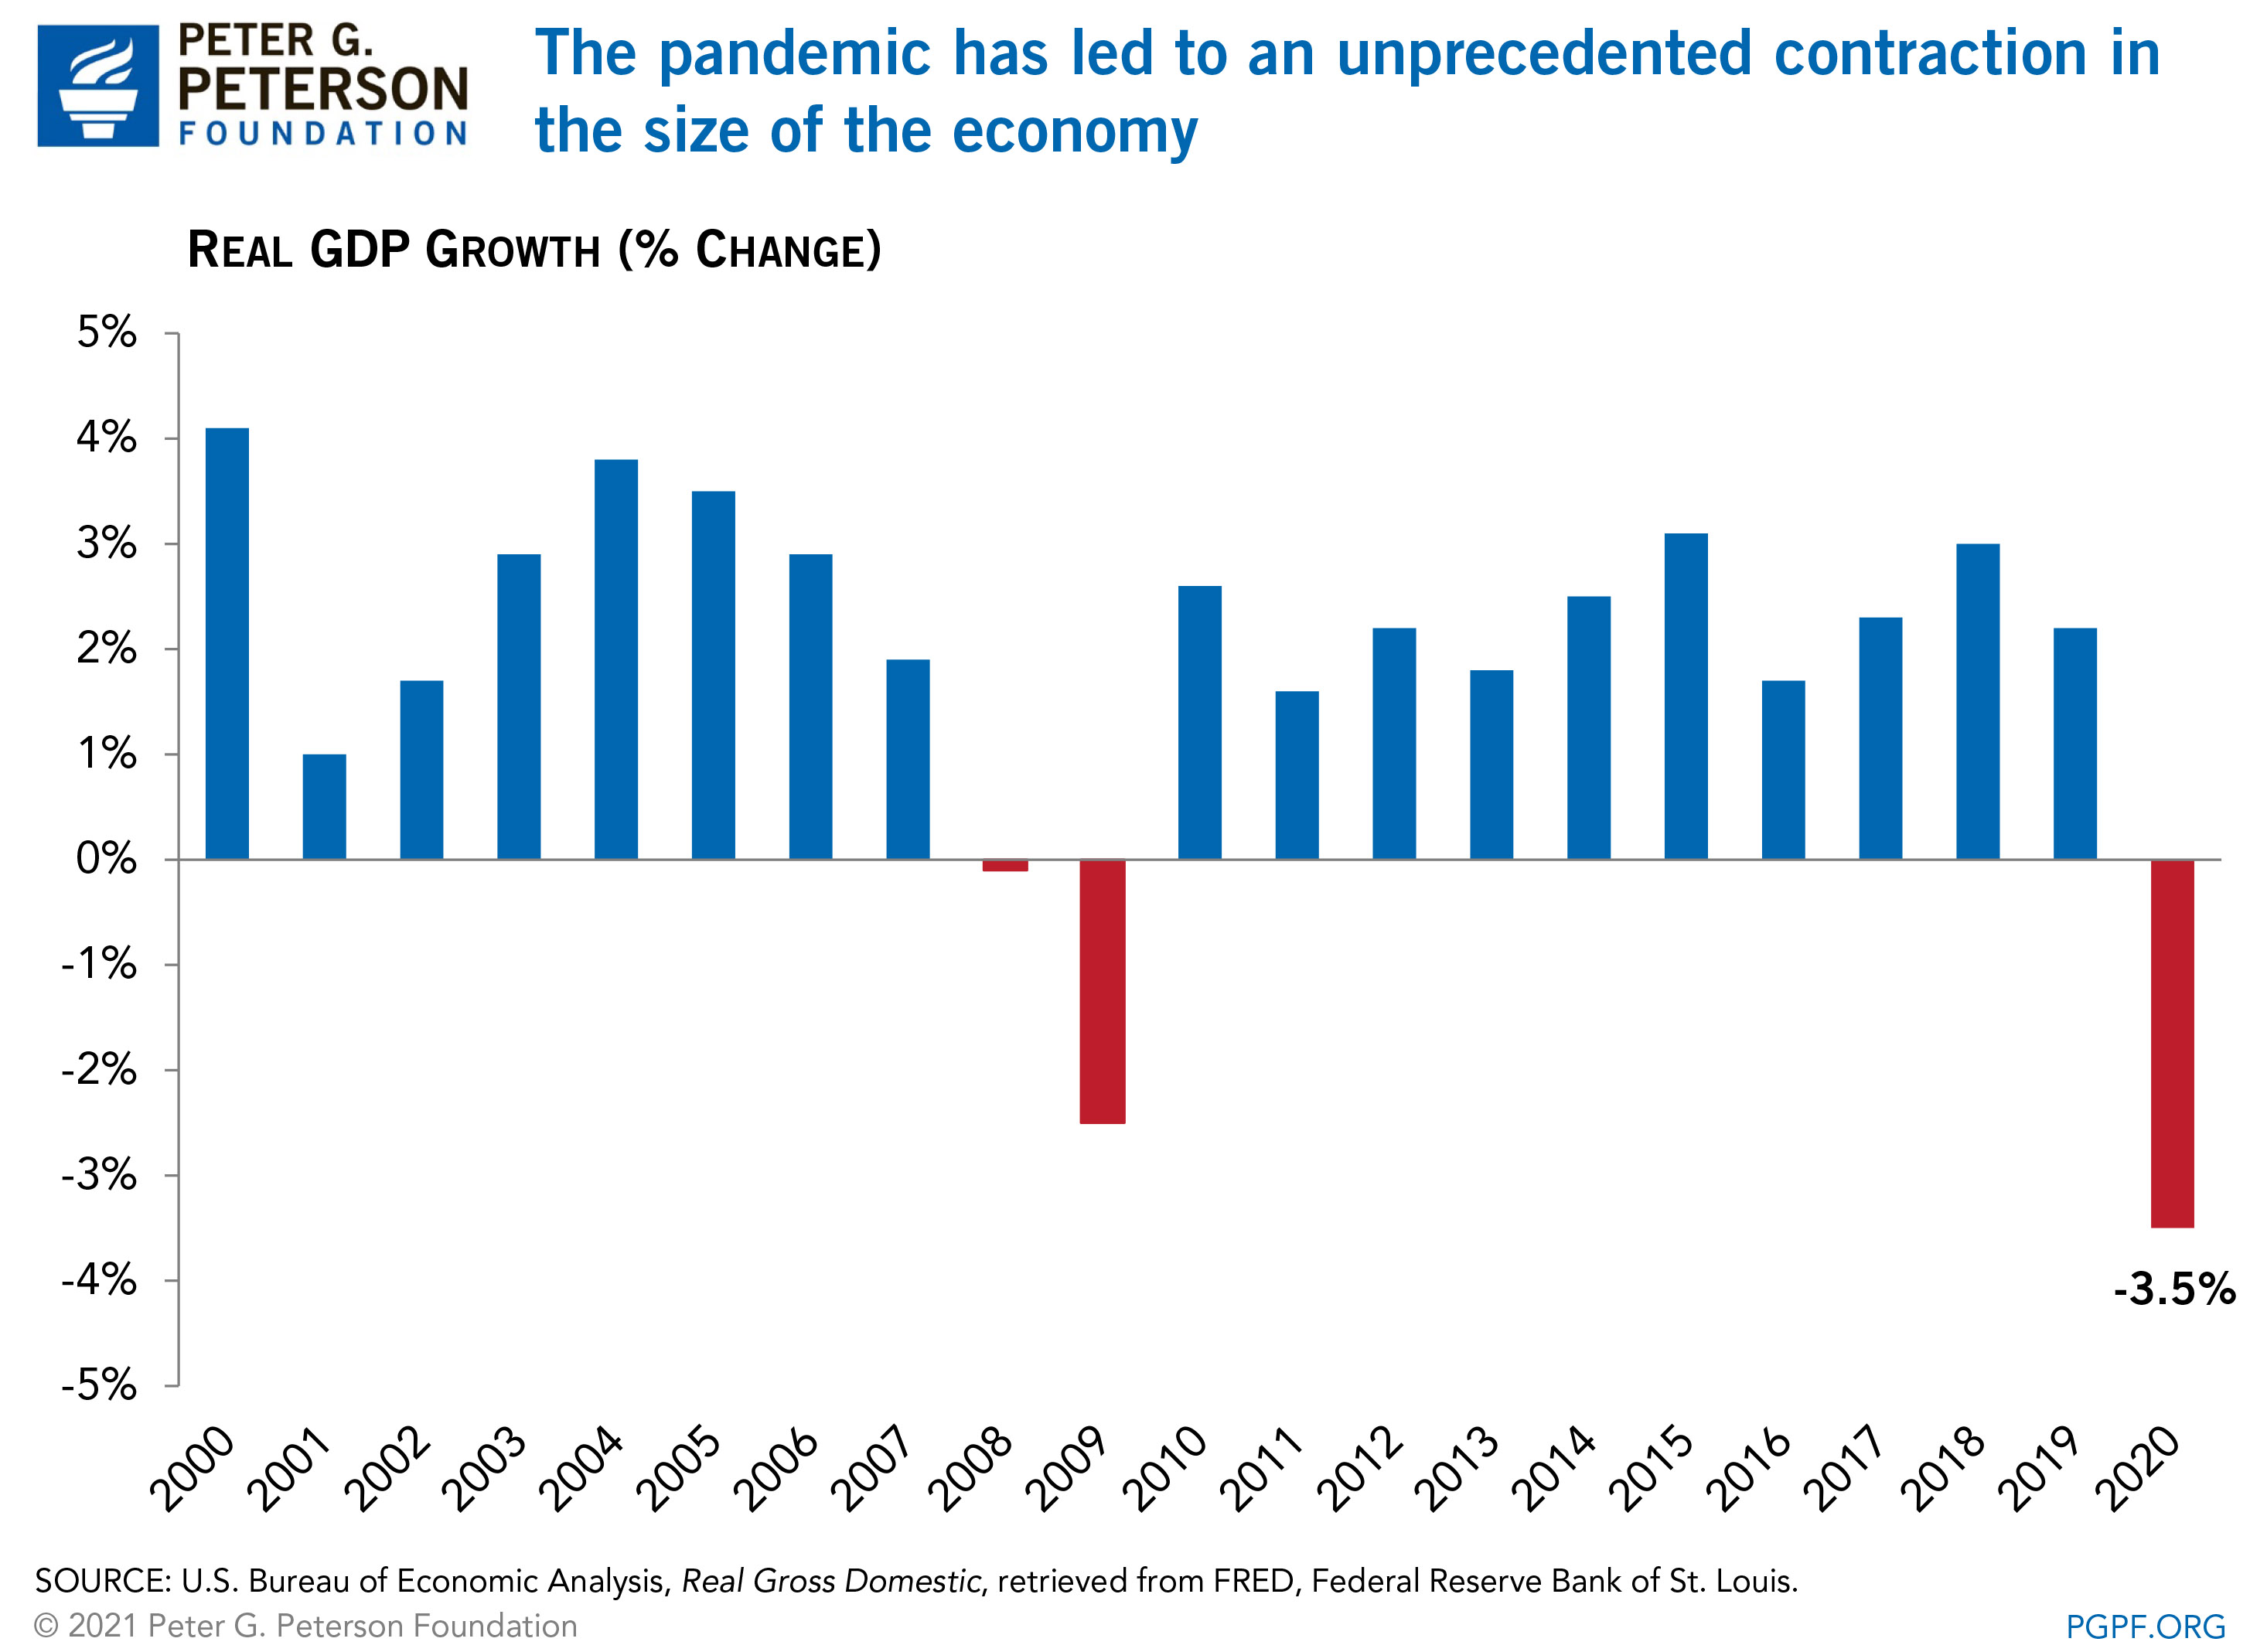 The pandemic has led to an unprecedented contraction in the size of the economy